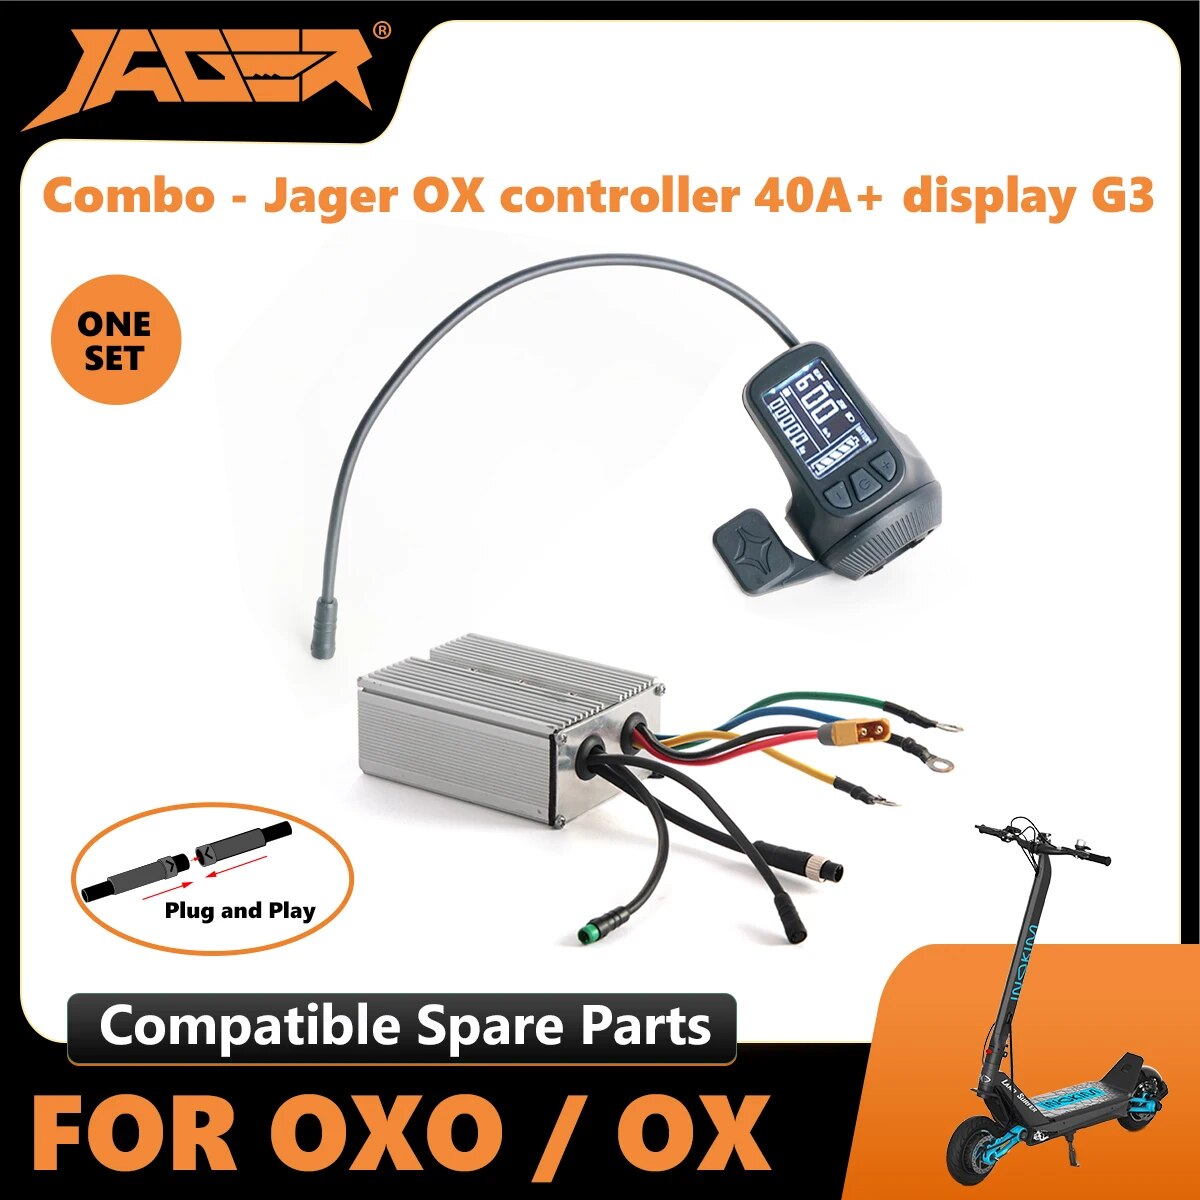 Combo-Jager OX Controller 40A with Jager Display generation 3 inokim parts accessories